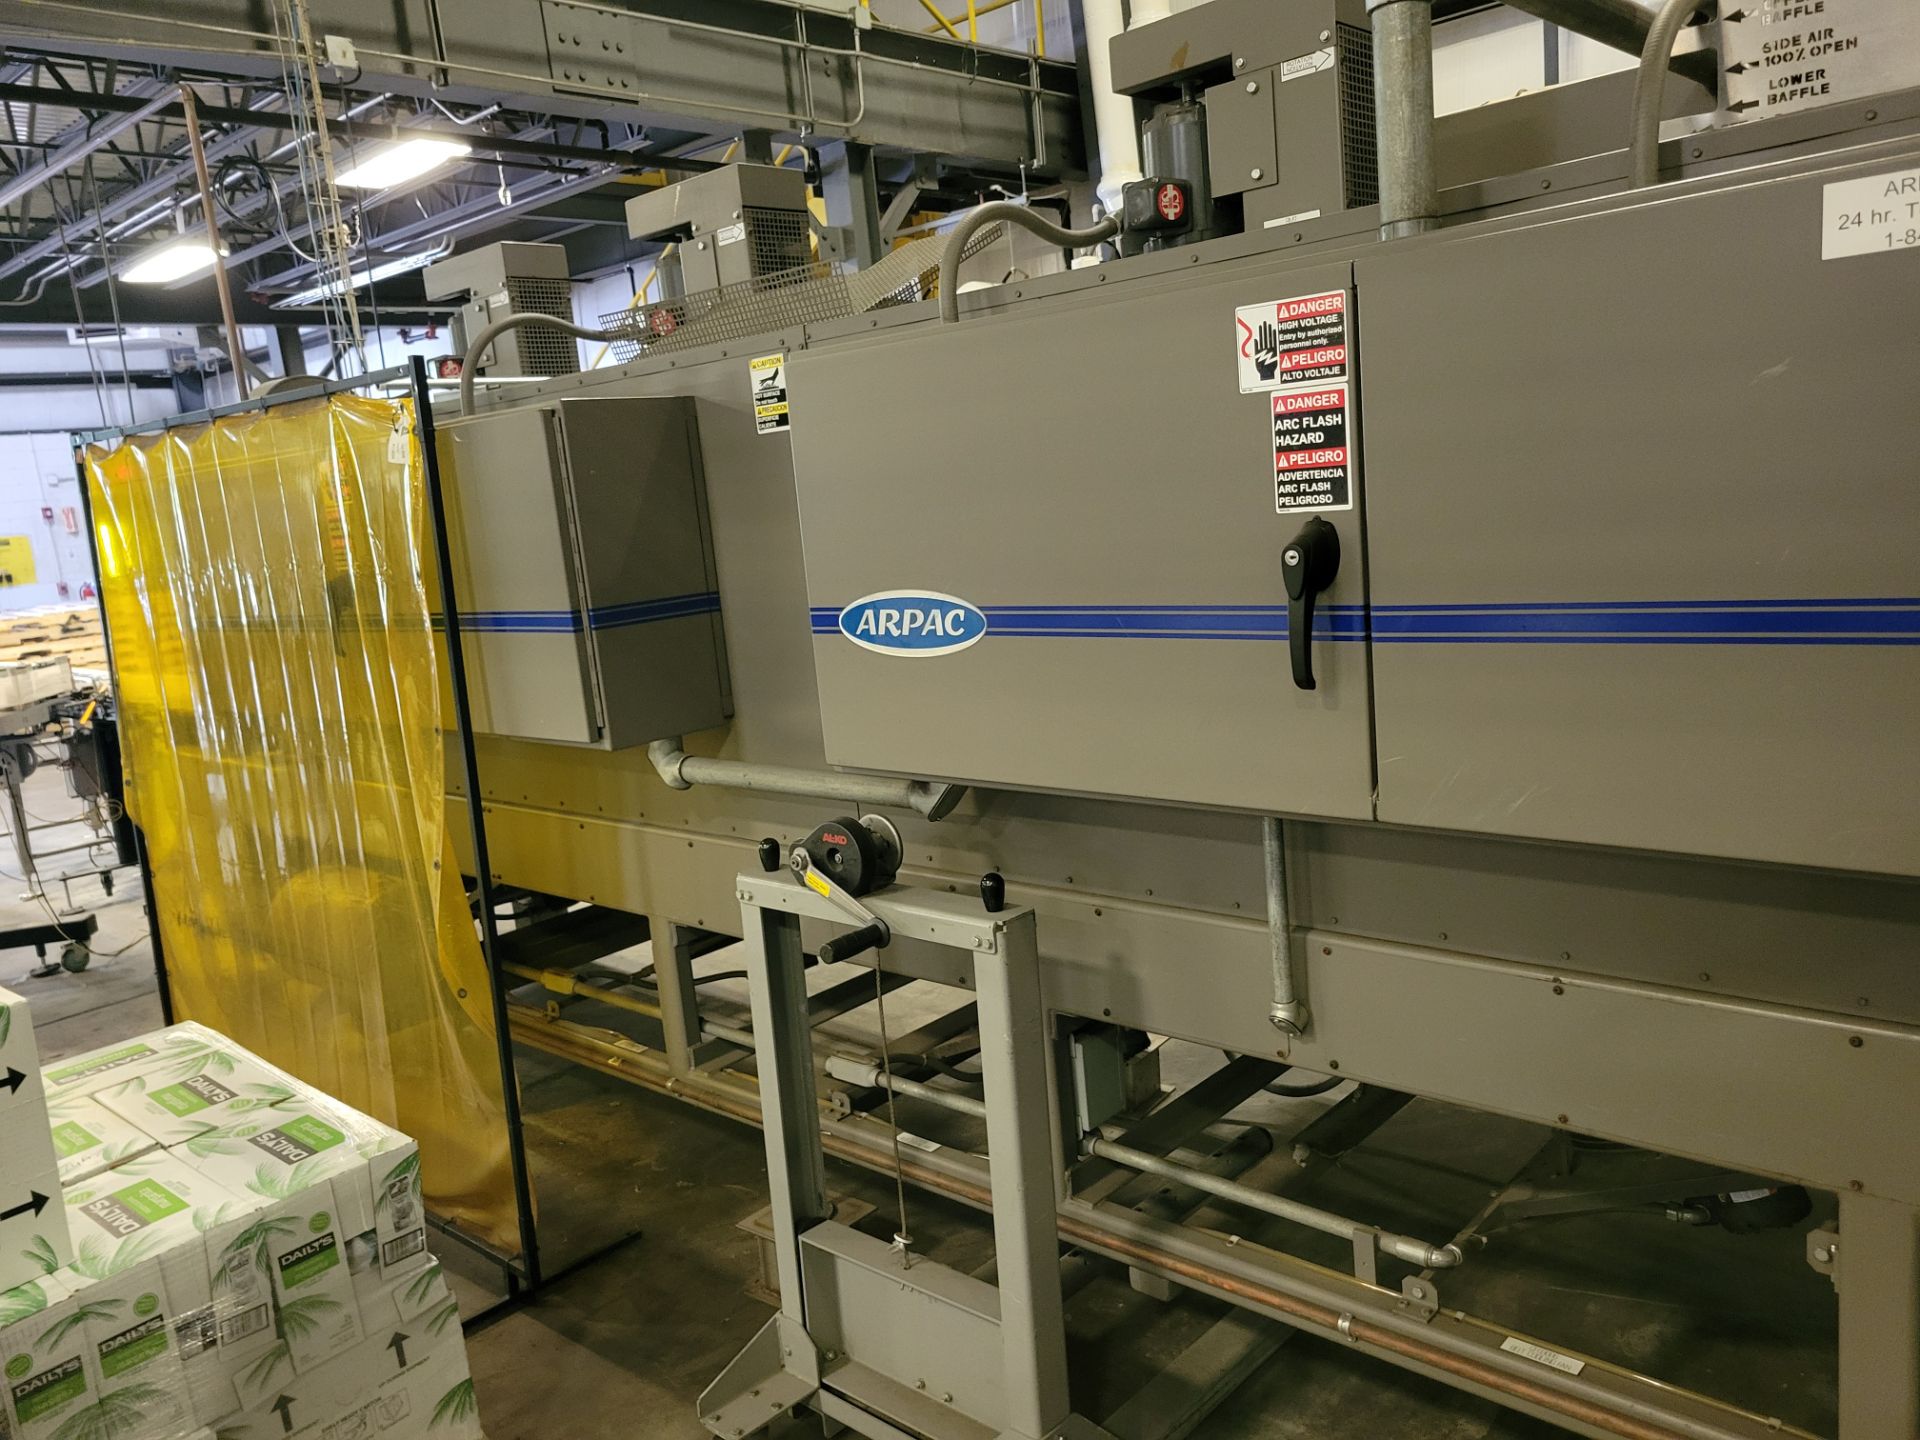 Arpac BPMP 5300 Shrink Wrapper with Heat Tunnel - Image 17 of 18